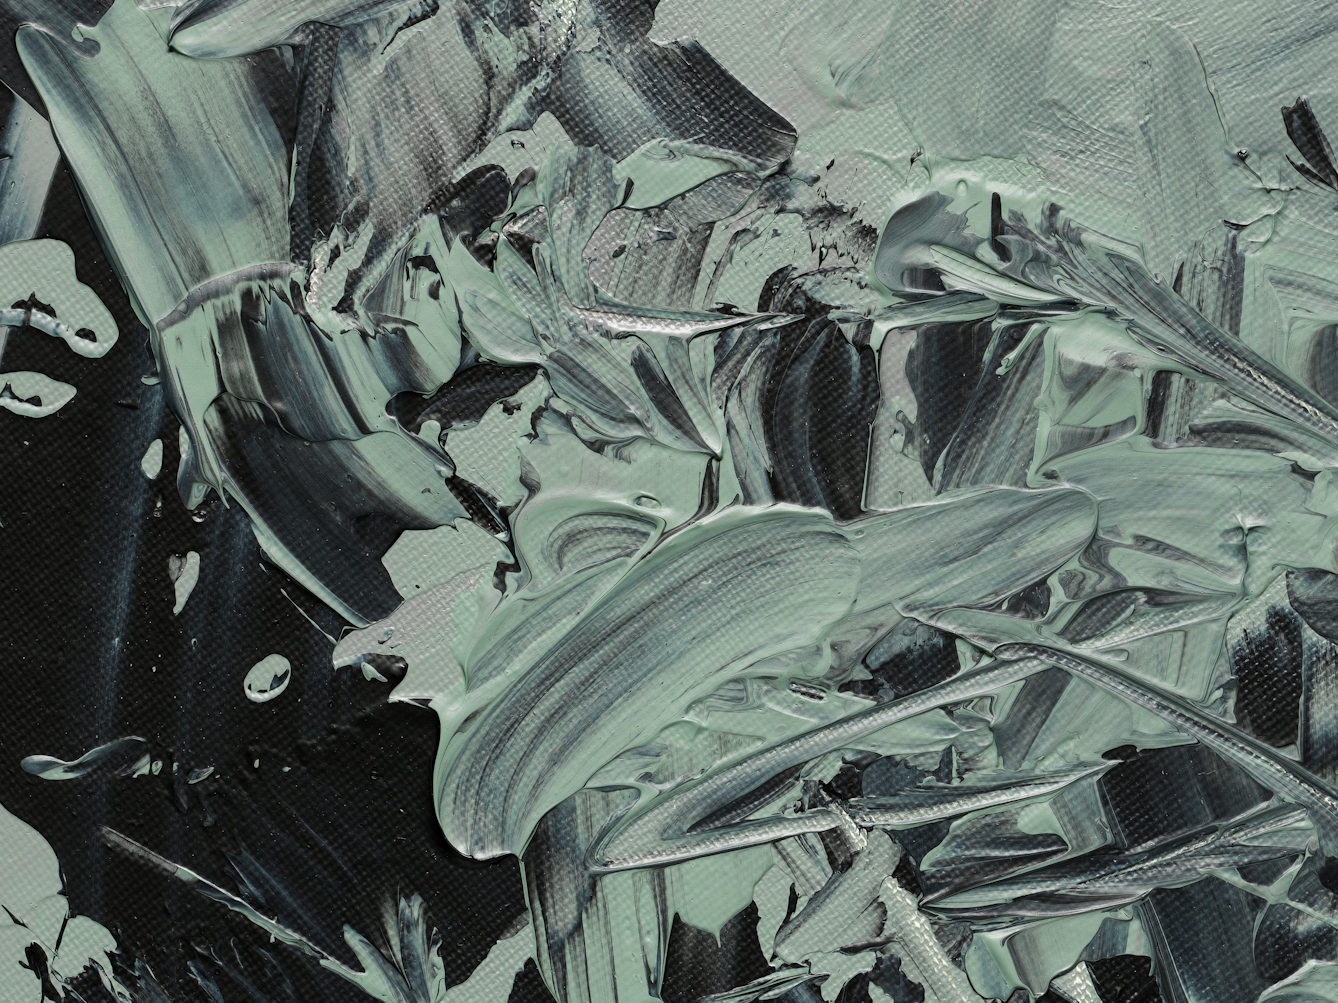 Photograph of close-up detail of a larger abstract expressionist painting on a large circular canvas, titled 'Binaries'. It is predominantly monochrome. The background layer is completely covered with grey and green-grey hues. Textural qualities have been captured in the acrylic paint including impressions made by deep brush strokes and gathered, layered paint. Black expressionist marks, created with a palette knife, scatter across the surface and begin to accumulate towards one side of the canvas. Some marks include waves of banded black and grey. The black marks are reminiscent of a murder of crows, with their onyx wings stretching and taking flight.